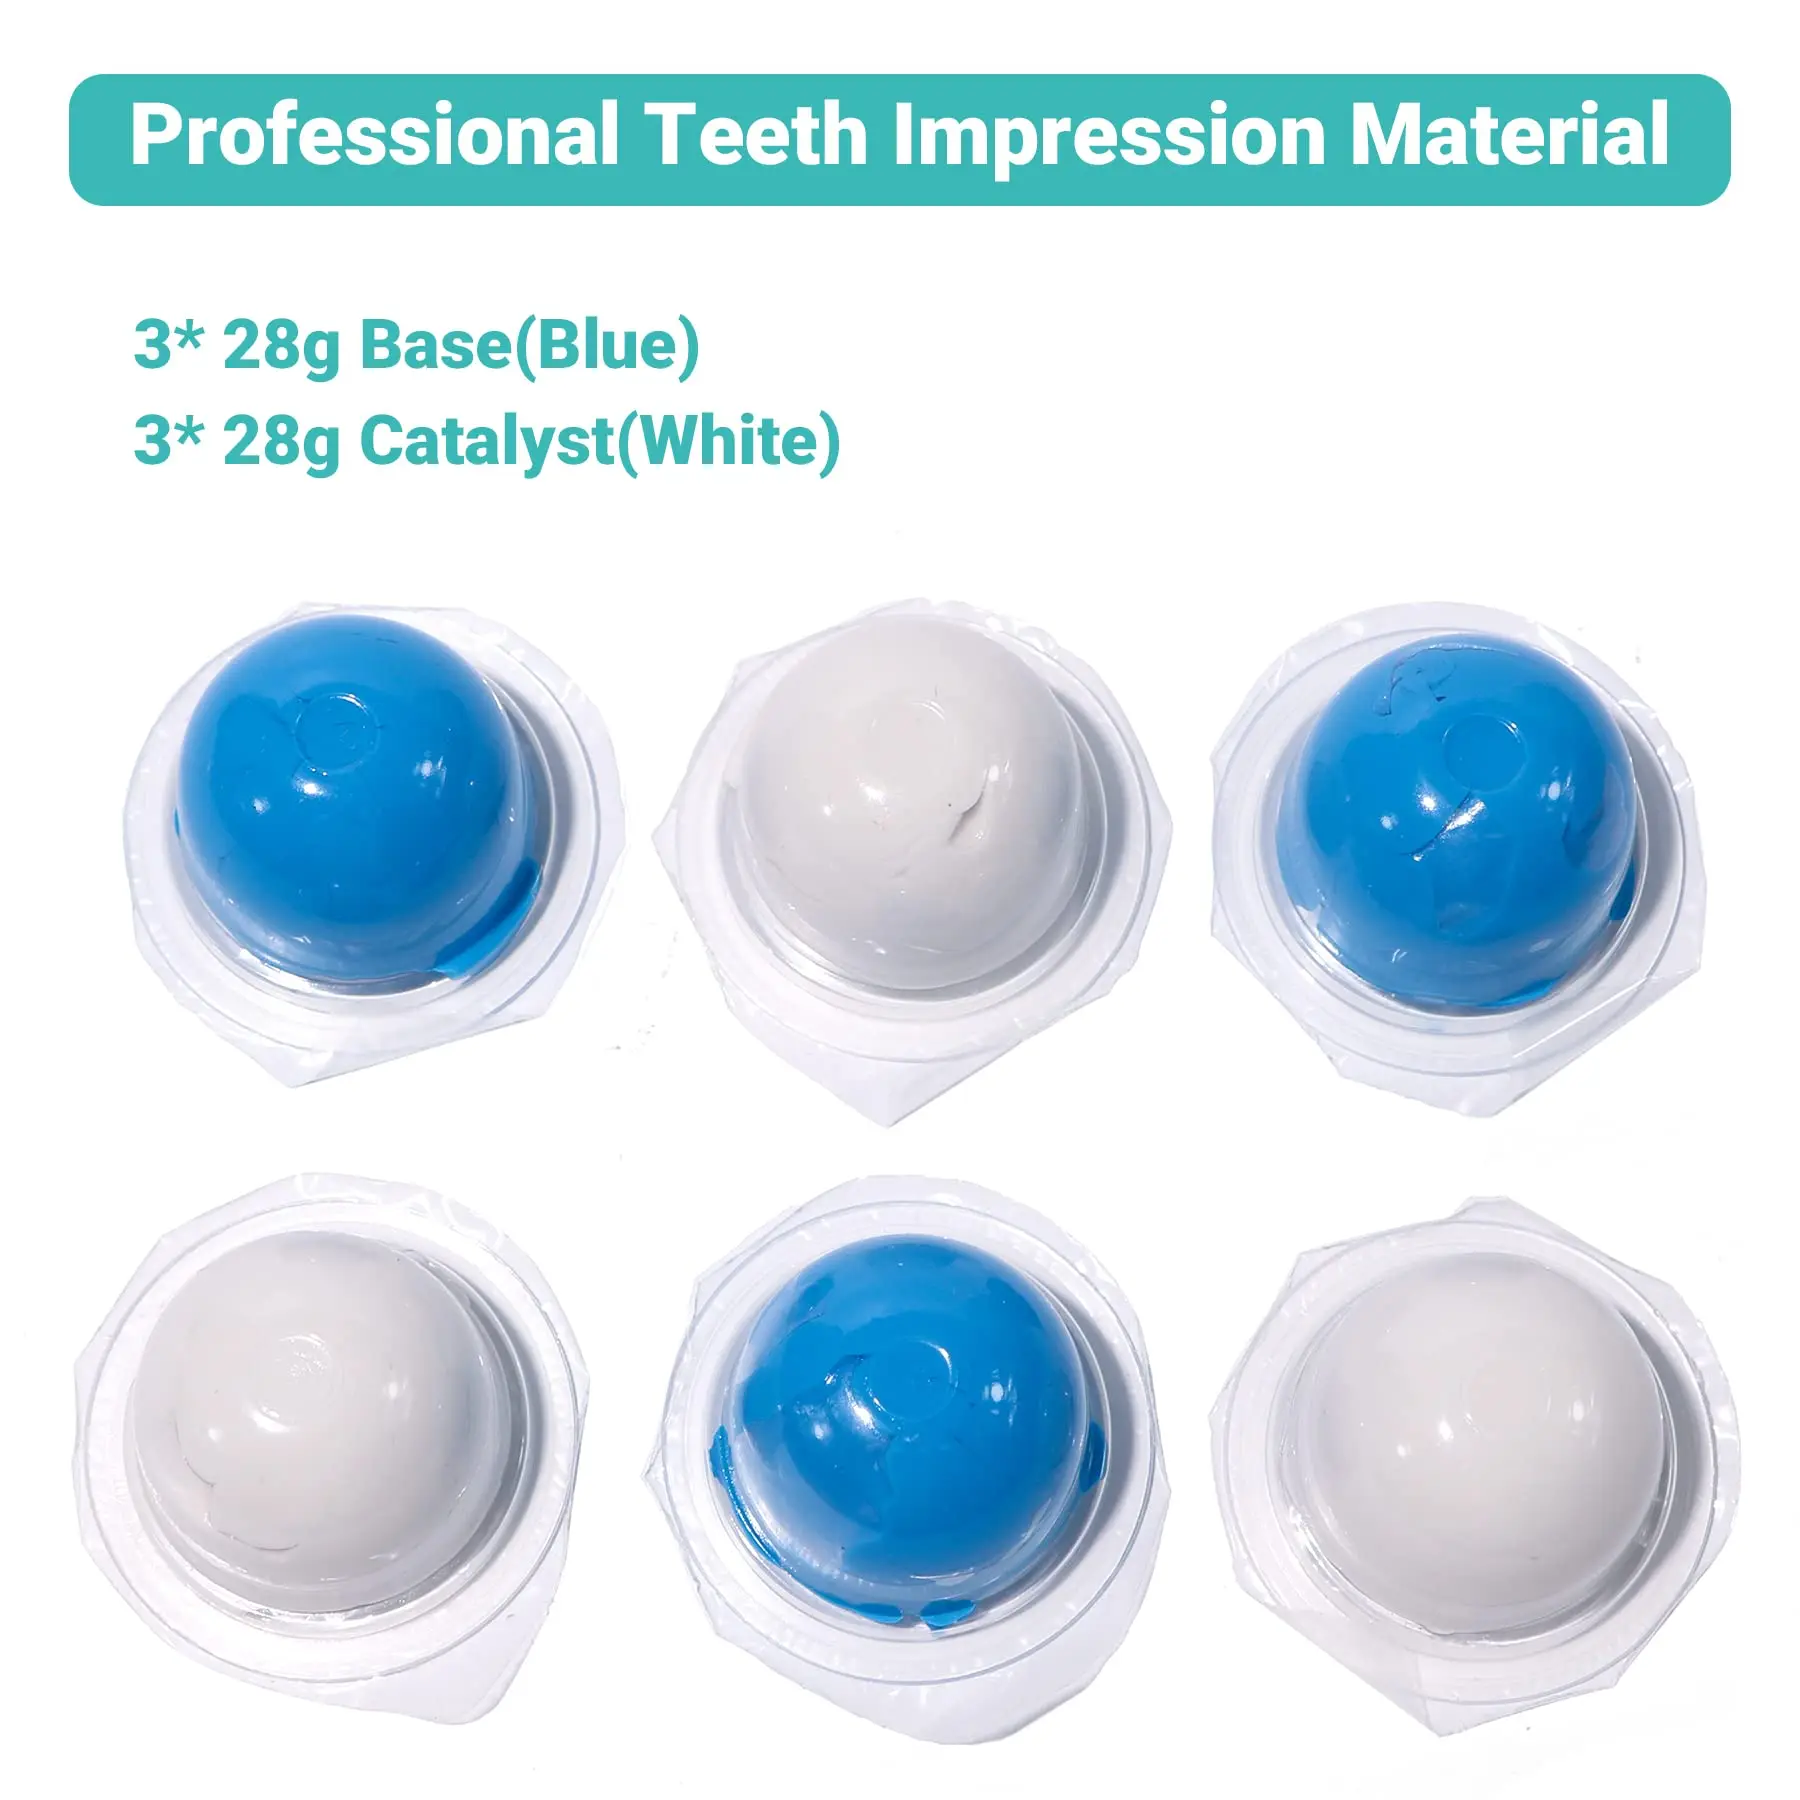 Dental Impression Material Putty Silicone Customize Mouth Tray Mold Kit  Dentistry Teeth Whitening Bleach Tools Oral Health Care - AliExpress